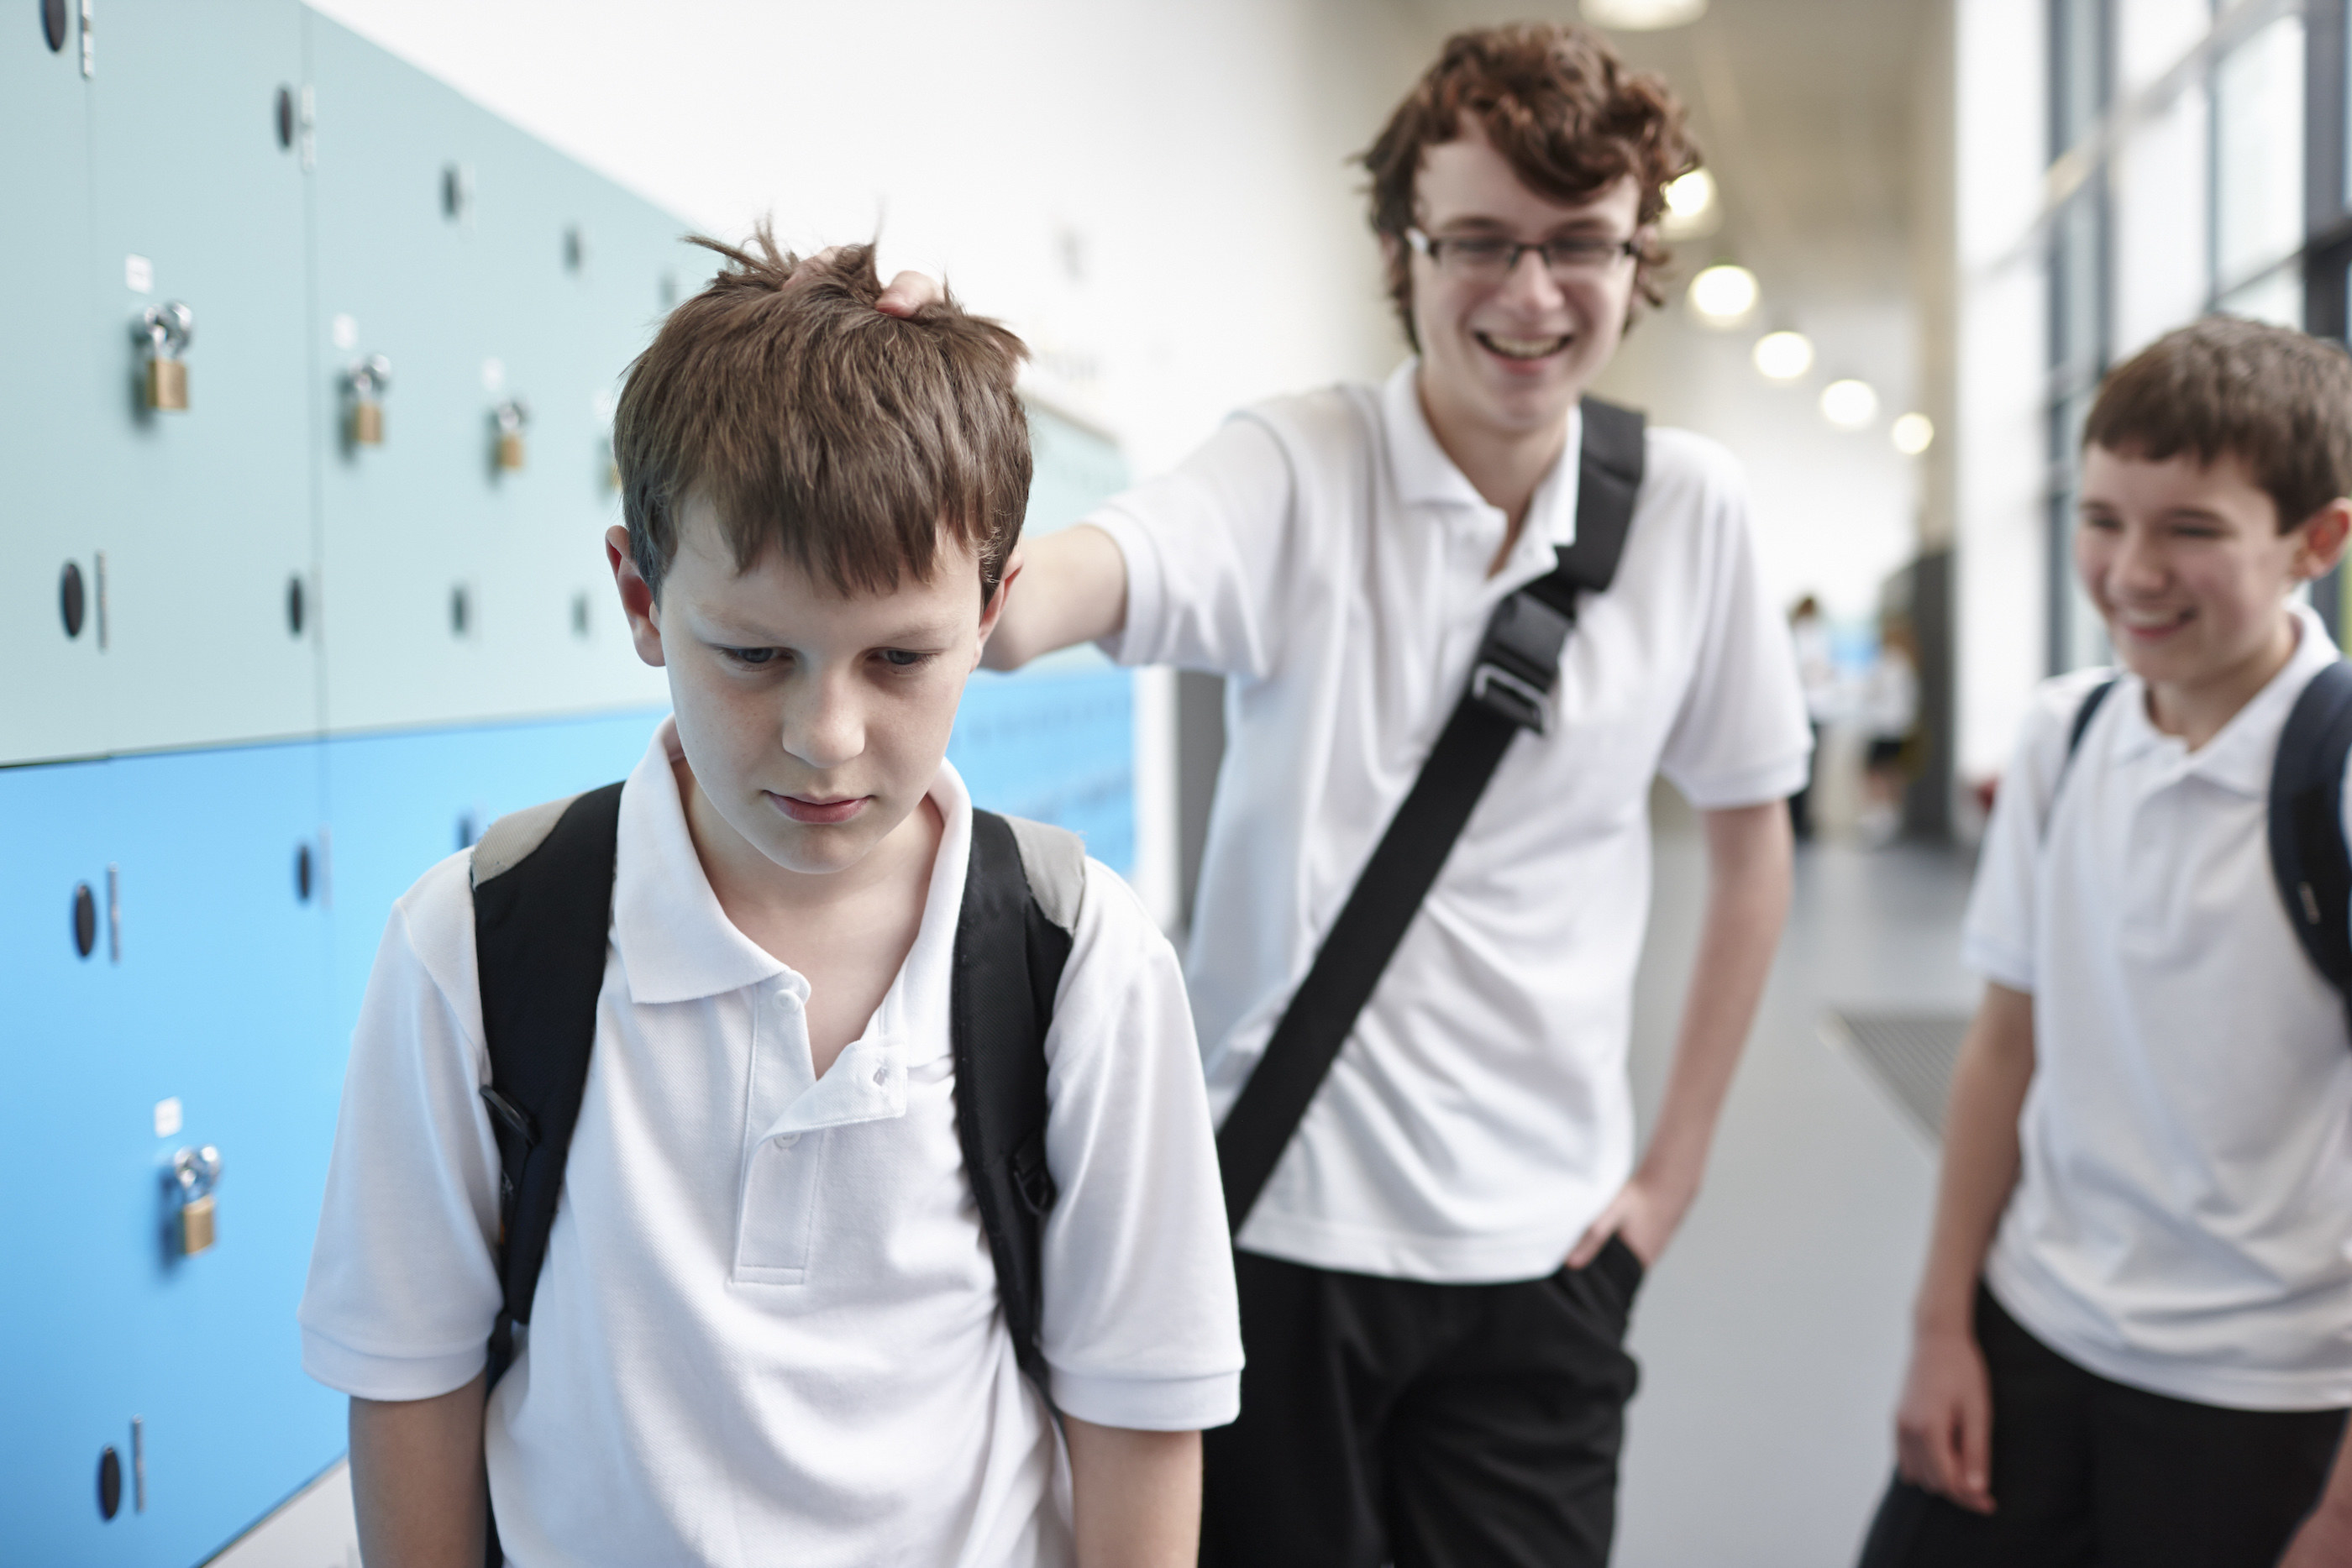 Three boys in a school hallway, with two laughing and one looking upset